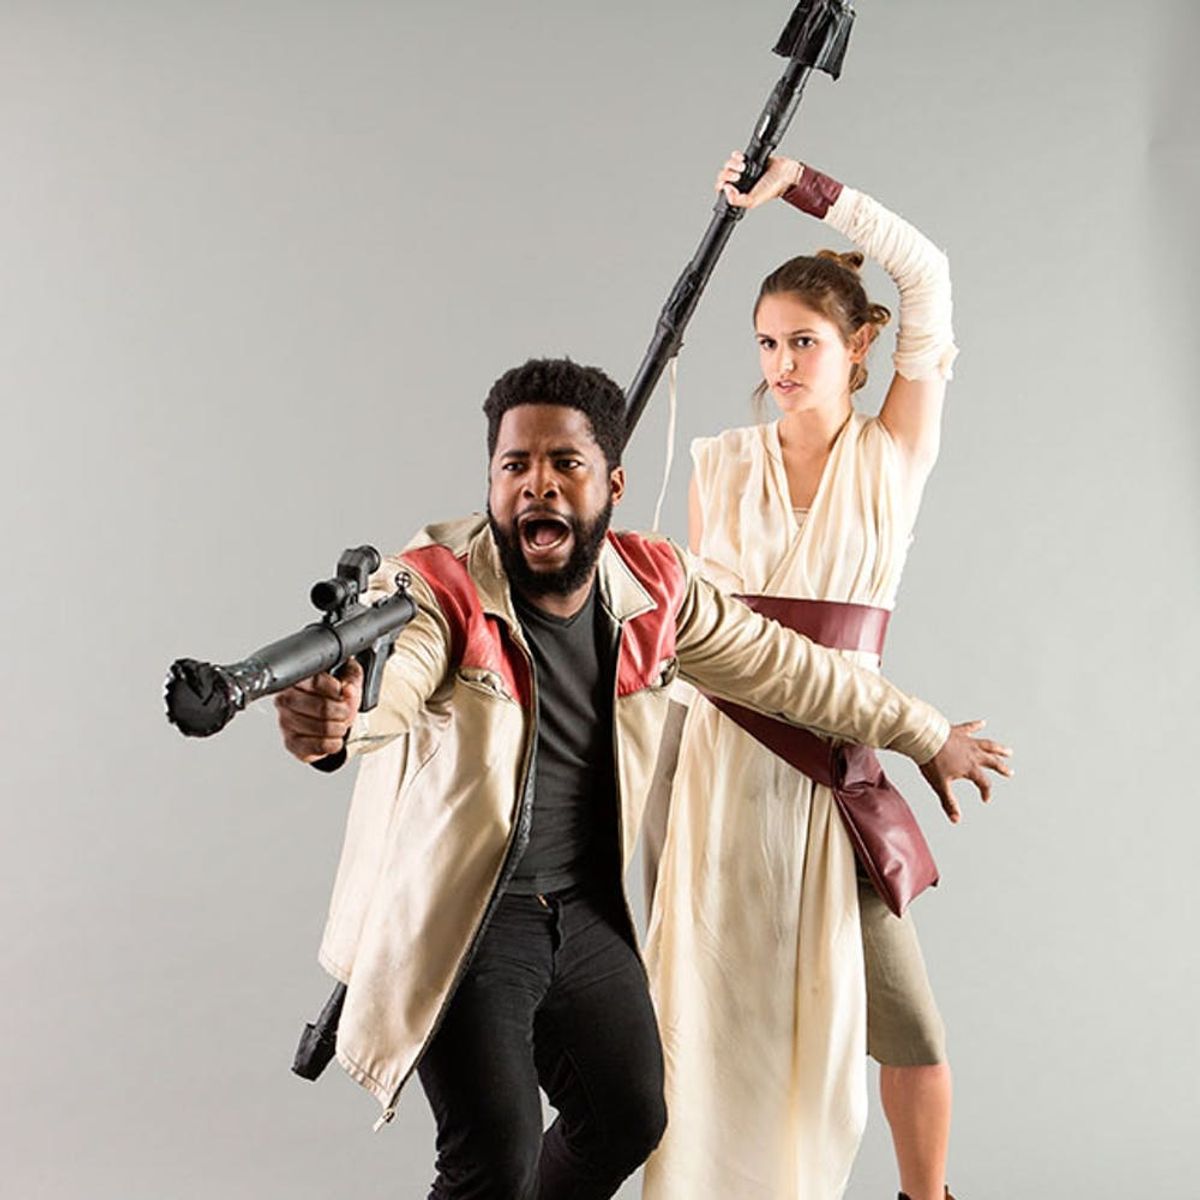 Go to a Galaxy Far, Far Away With This Star Wars Finn + Rey Couples Costume